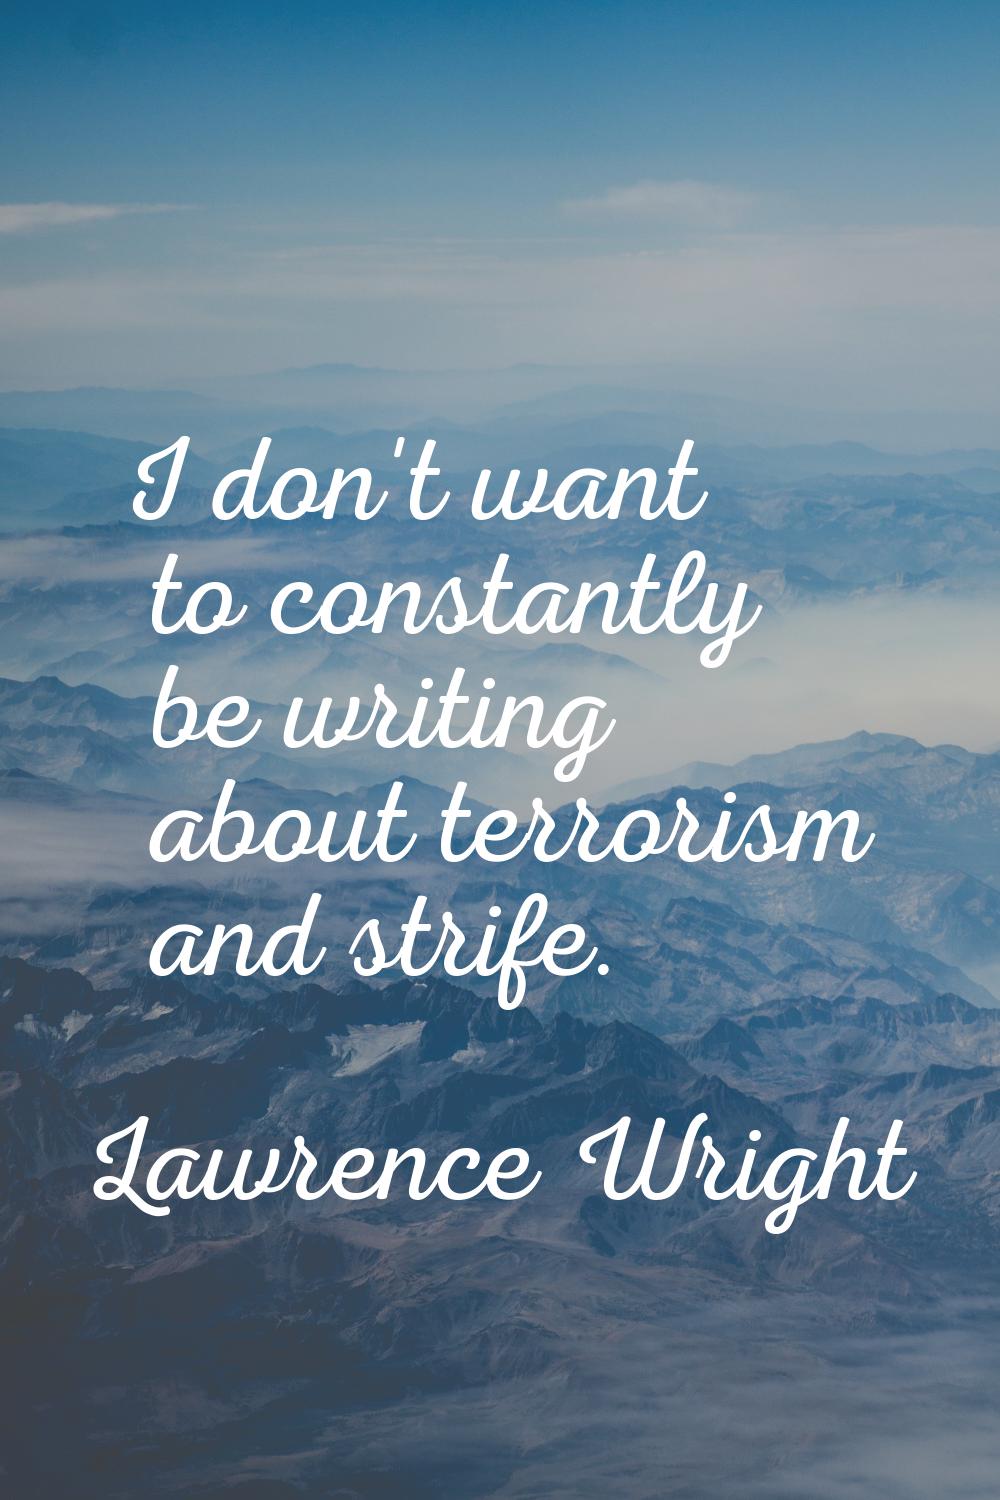 I don't want to constantly be writing about terrorism and strife.